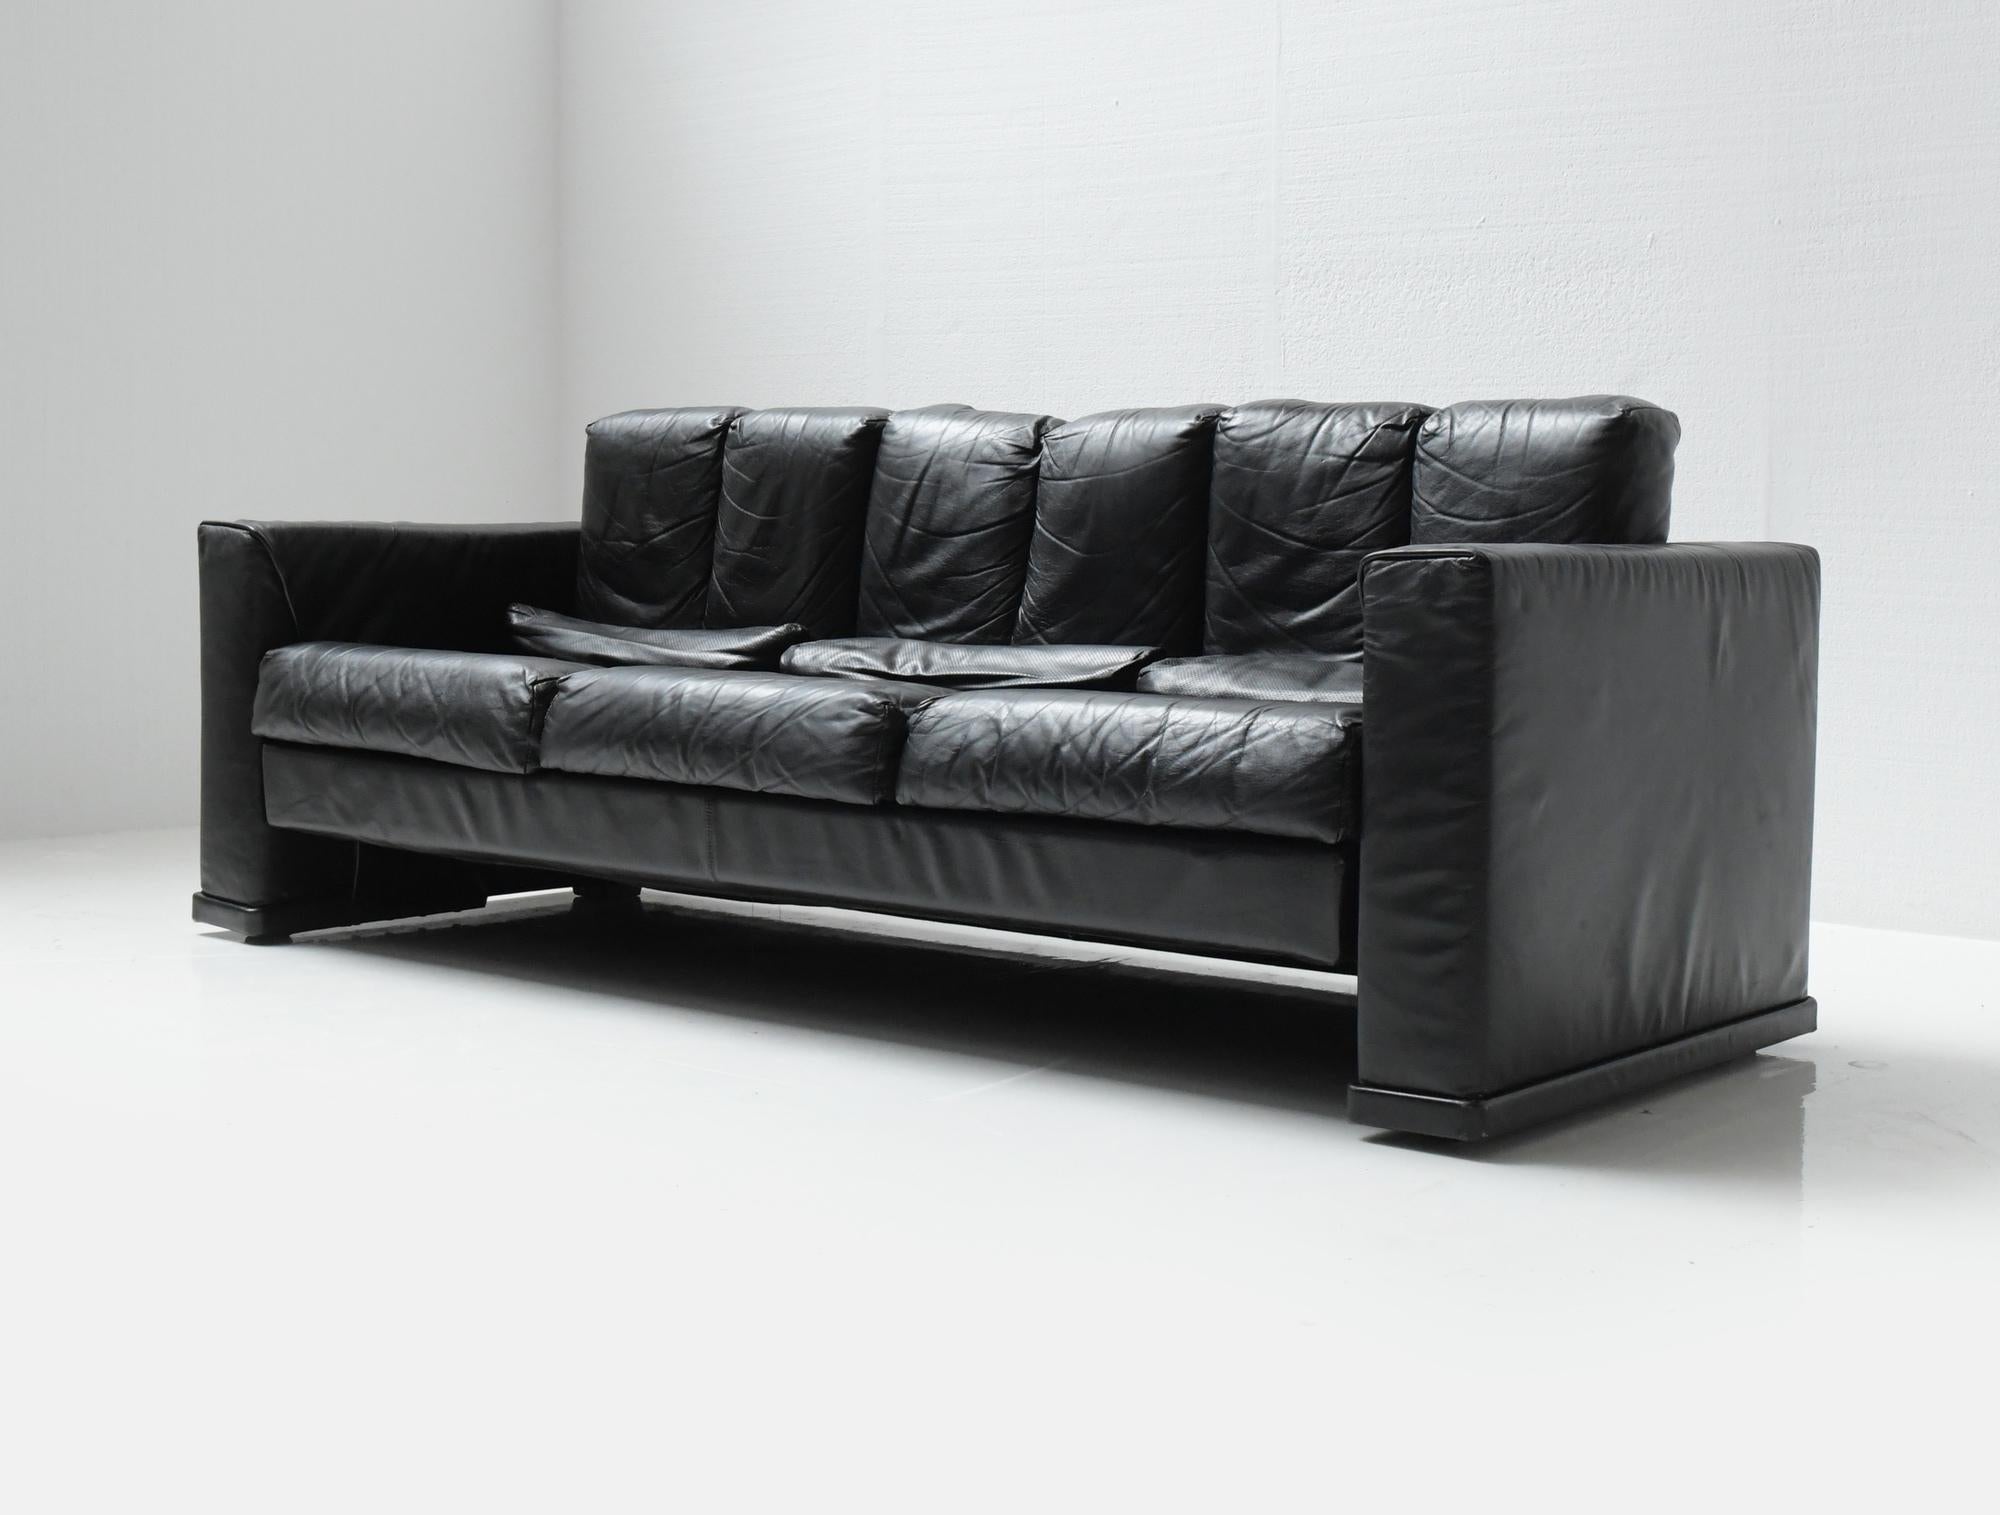 Stunning & rare Excelsior sofa by Mario Bellini for B&B Italy, 1985. 
Full black leather! Still 100% original. 

No damage.
The leather has some normal wear for its age.

Measurements :

w225 x d81 x h84 cm